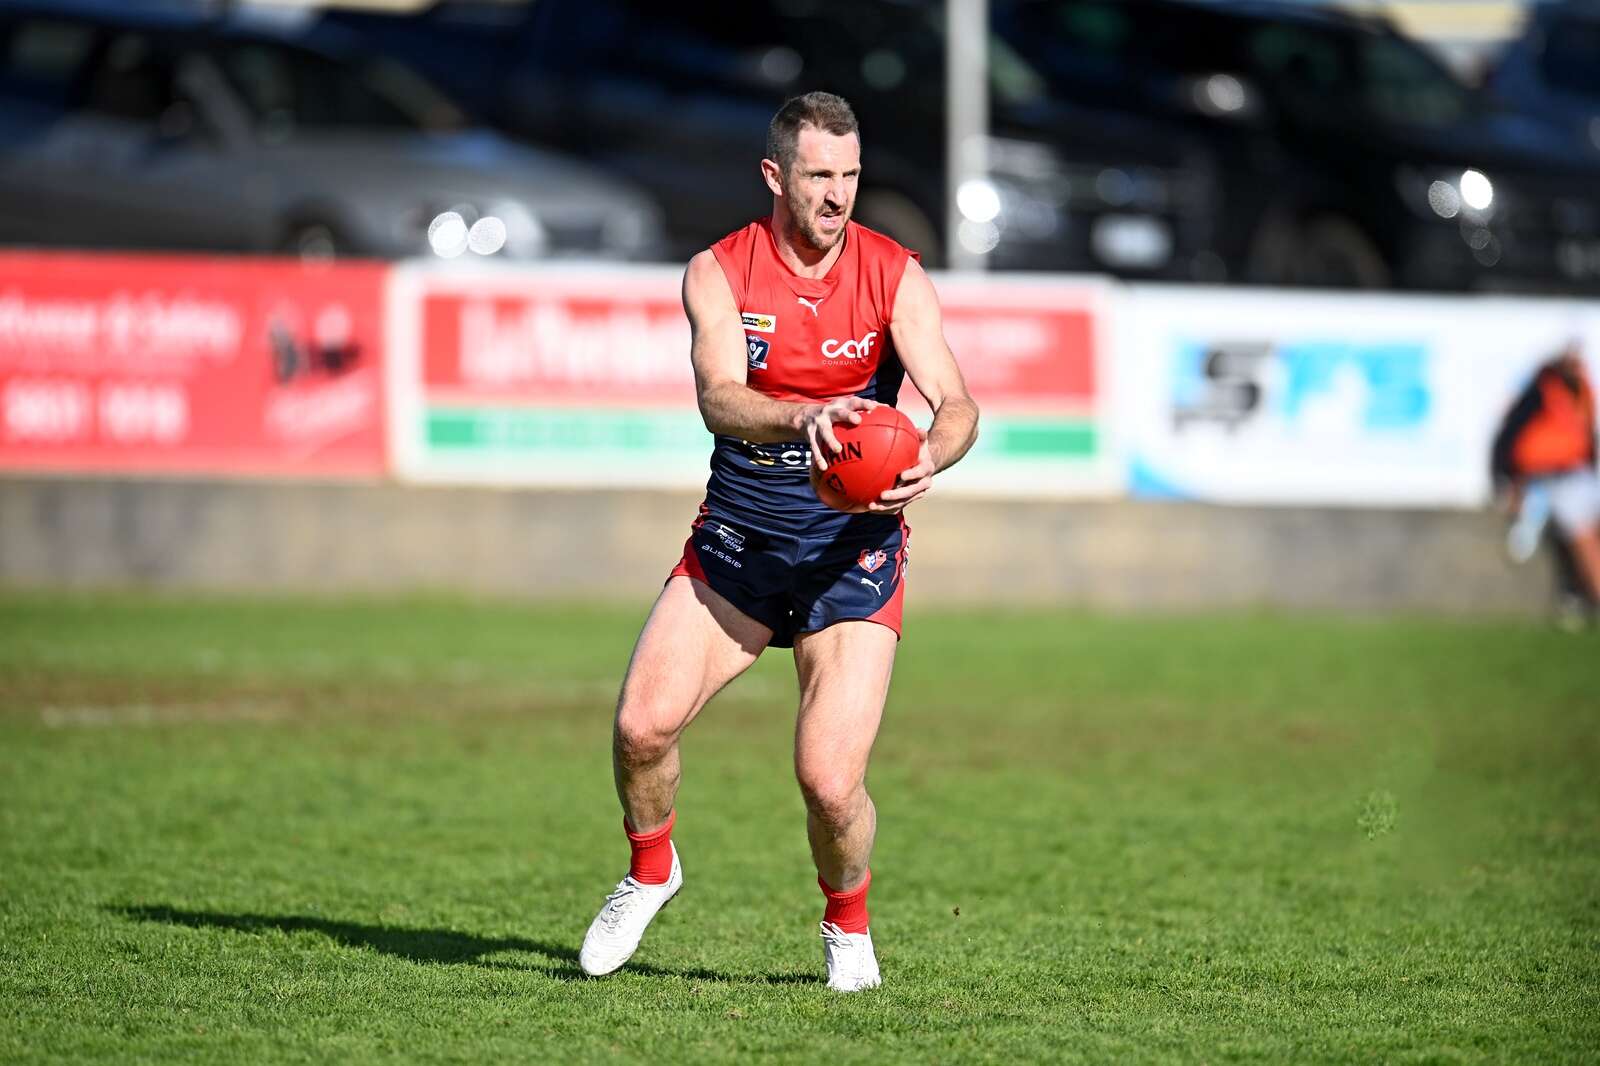 This former AFL star may have broken a record during his performance against Seymour